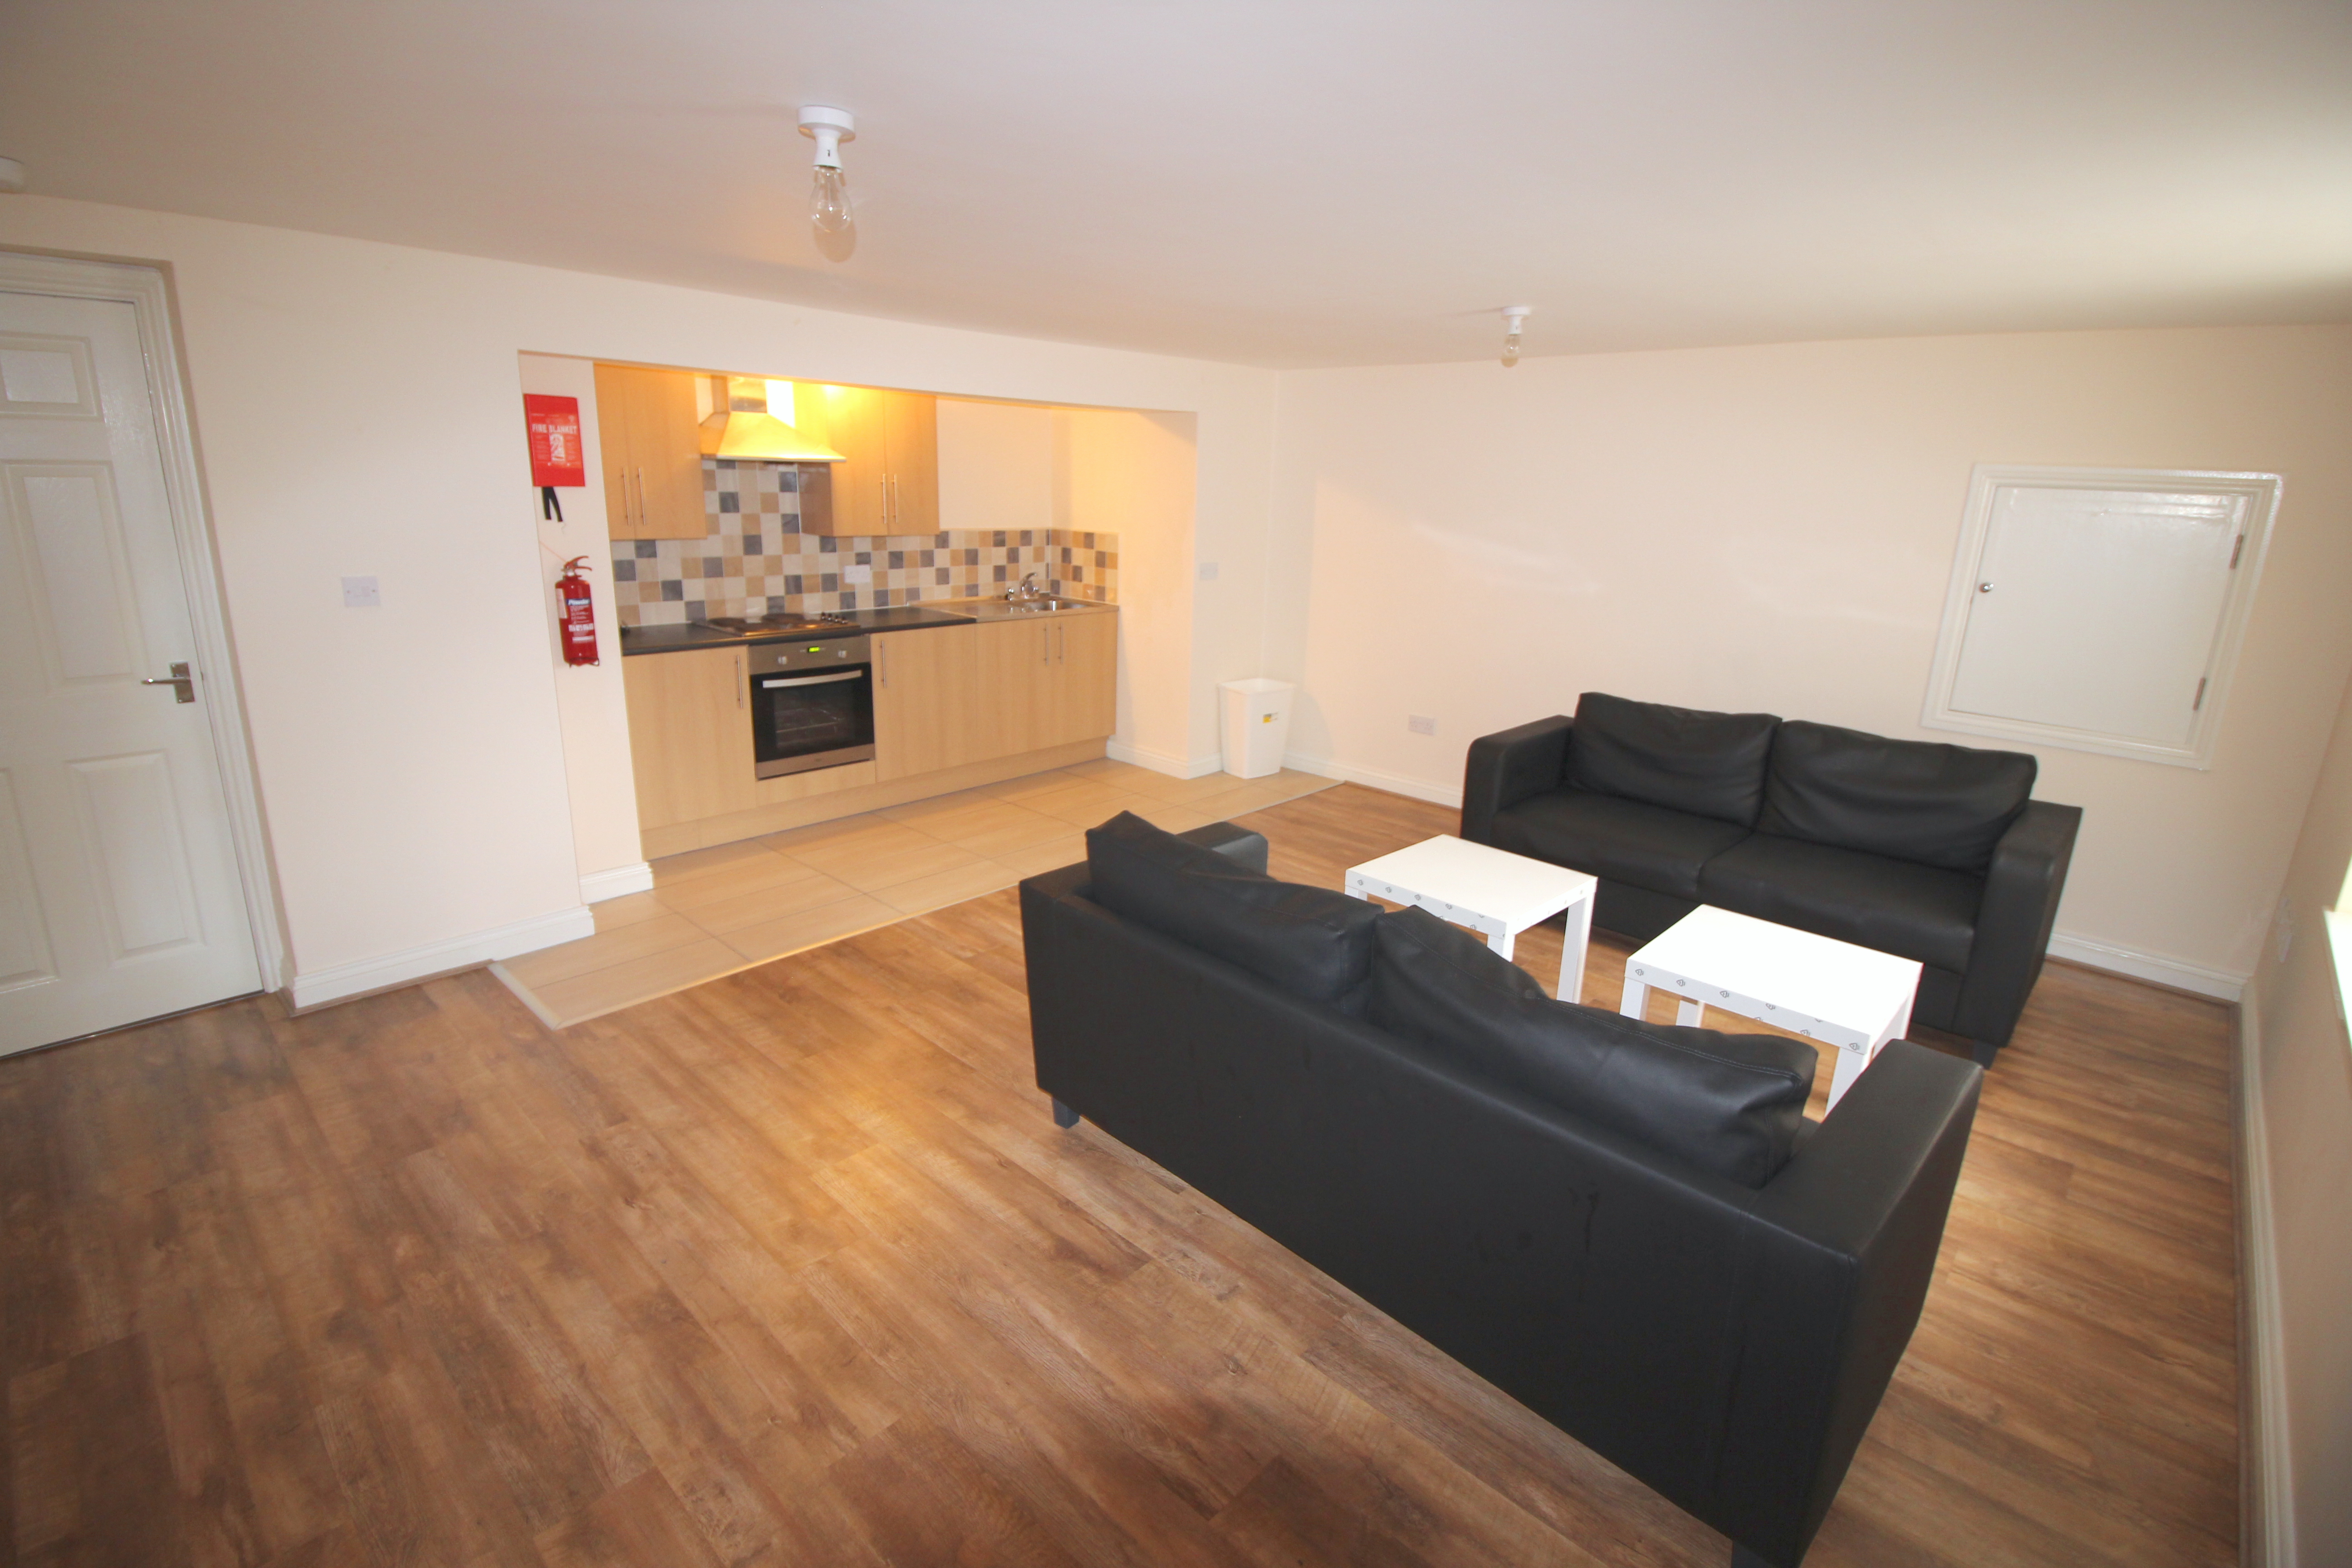 8 Bed Student House, Victoria Street NE4 £130.00 PPPW